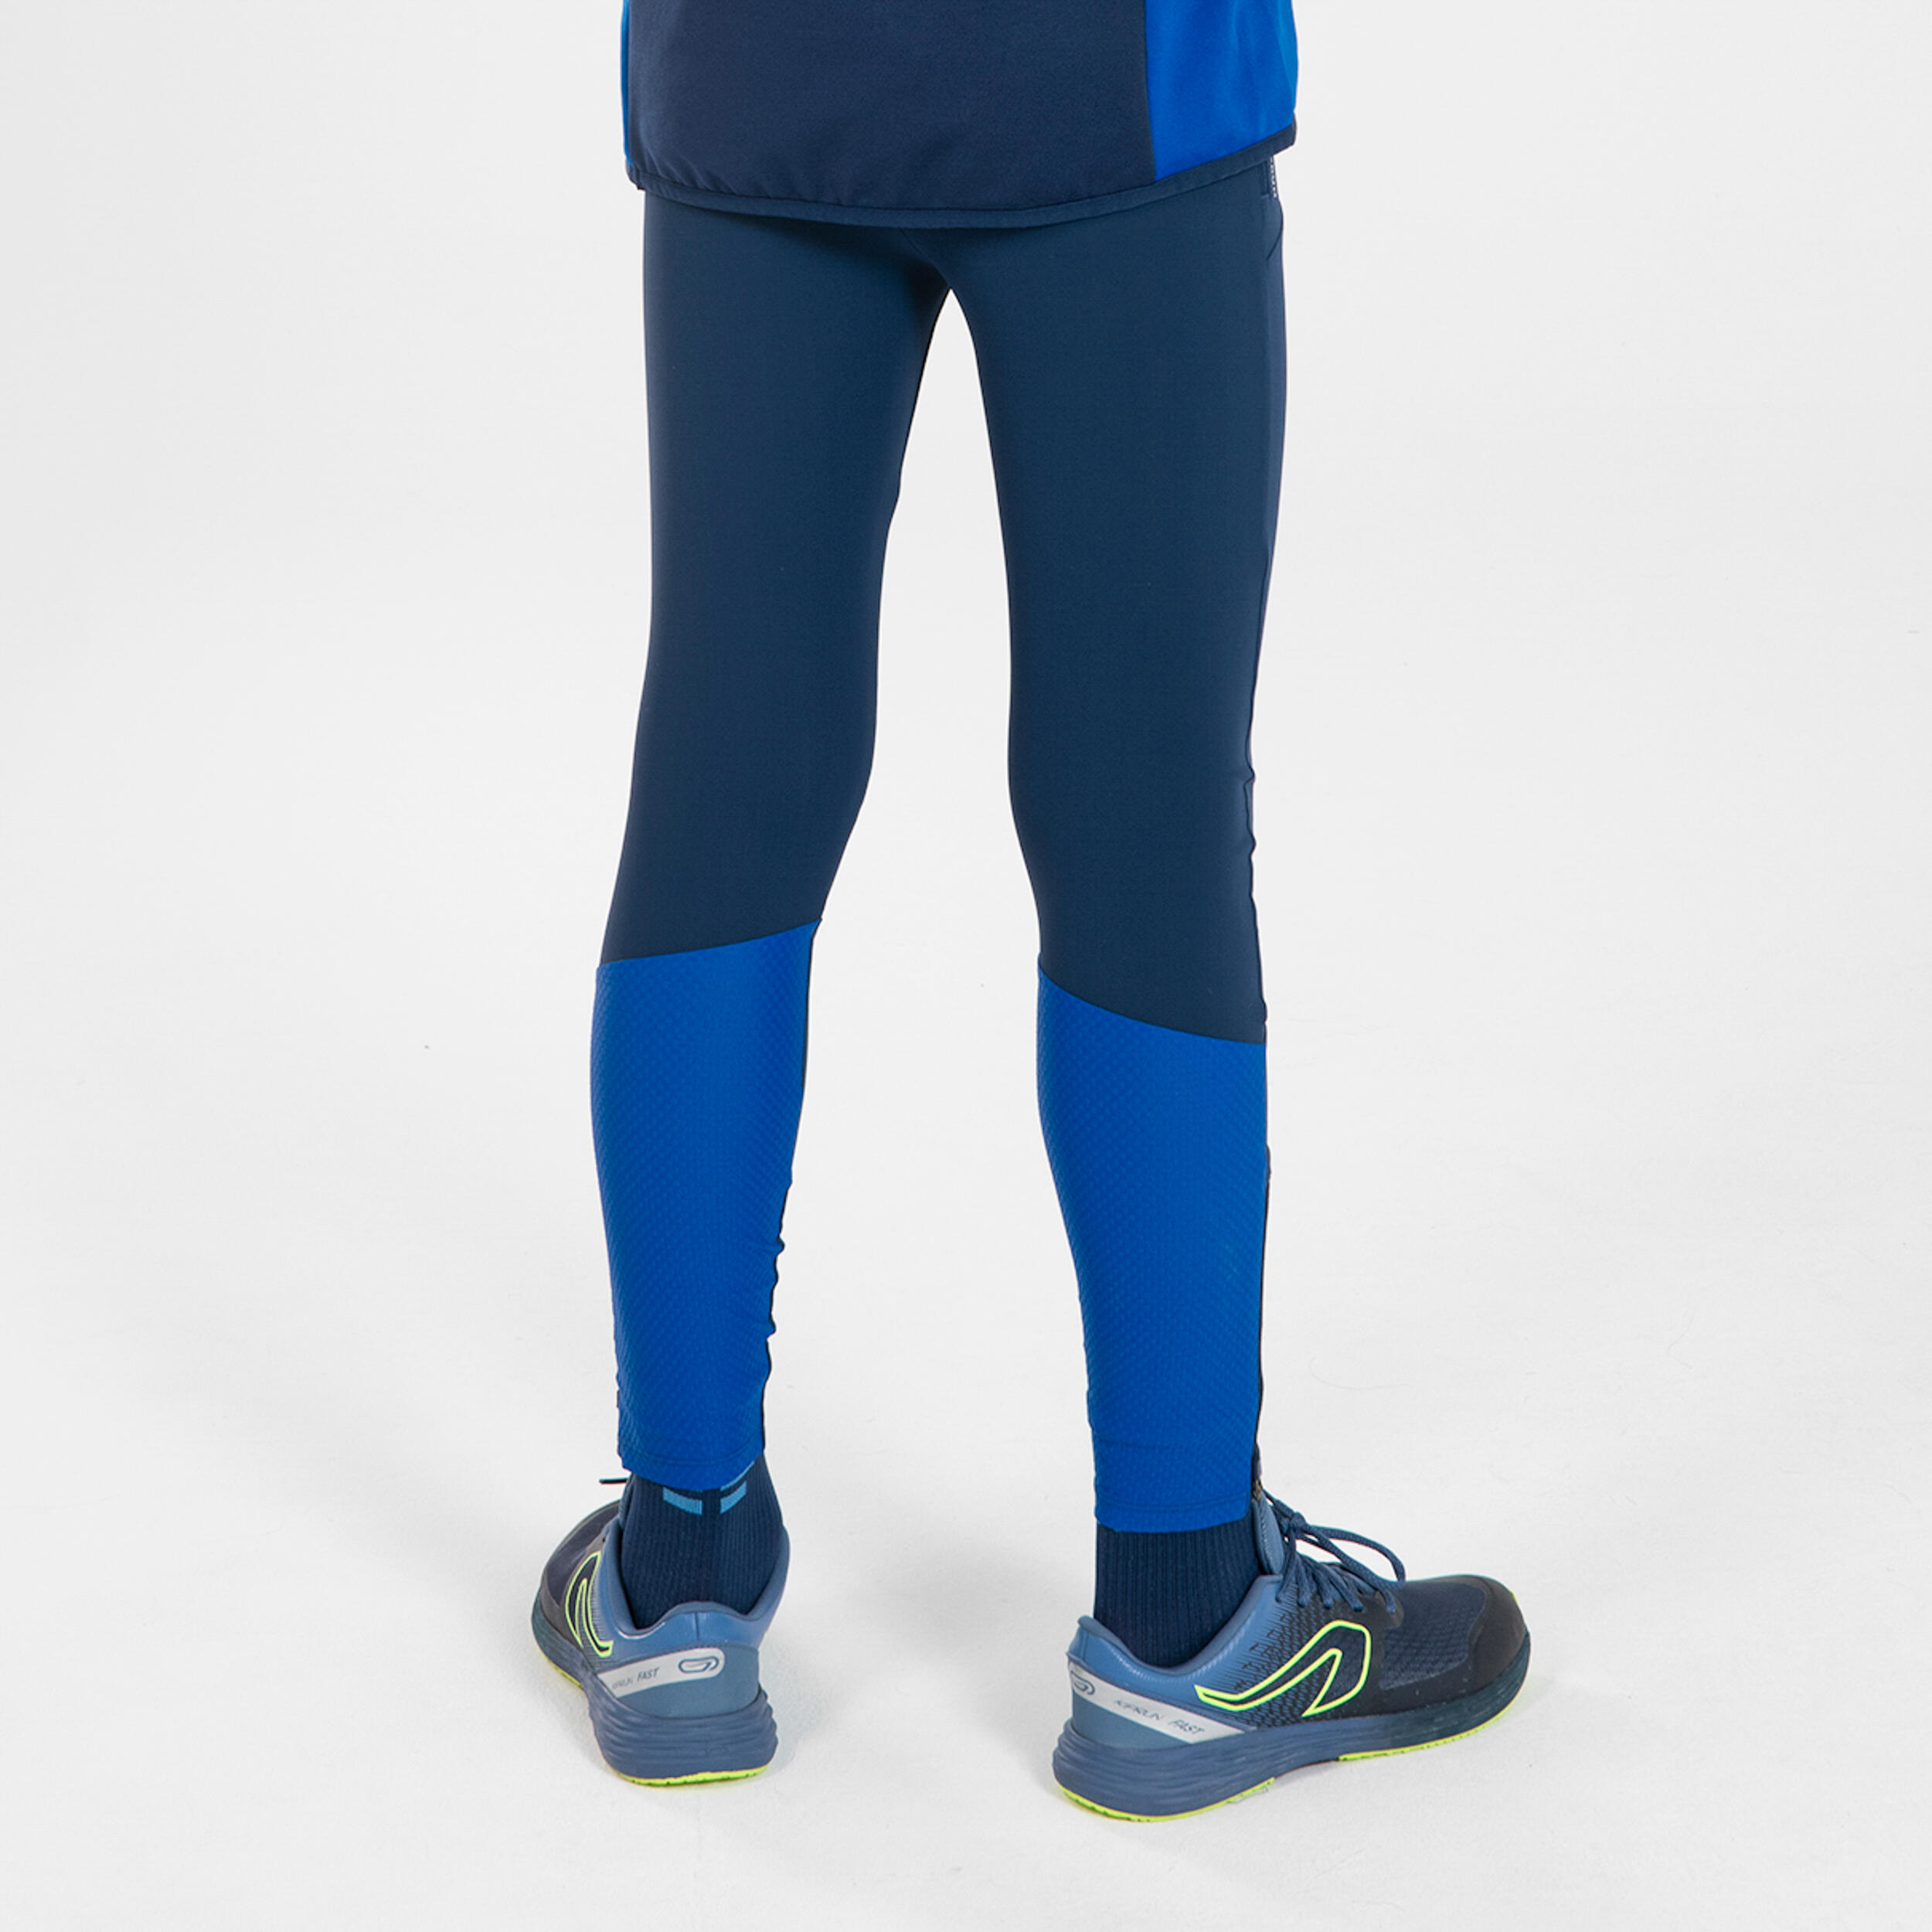 KIDS' RUNNING TIGHTS - KIPRUN DRY+ NAVY BLUE AND ELECTRIC BLUE 11/12